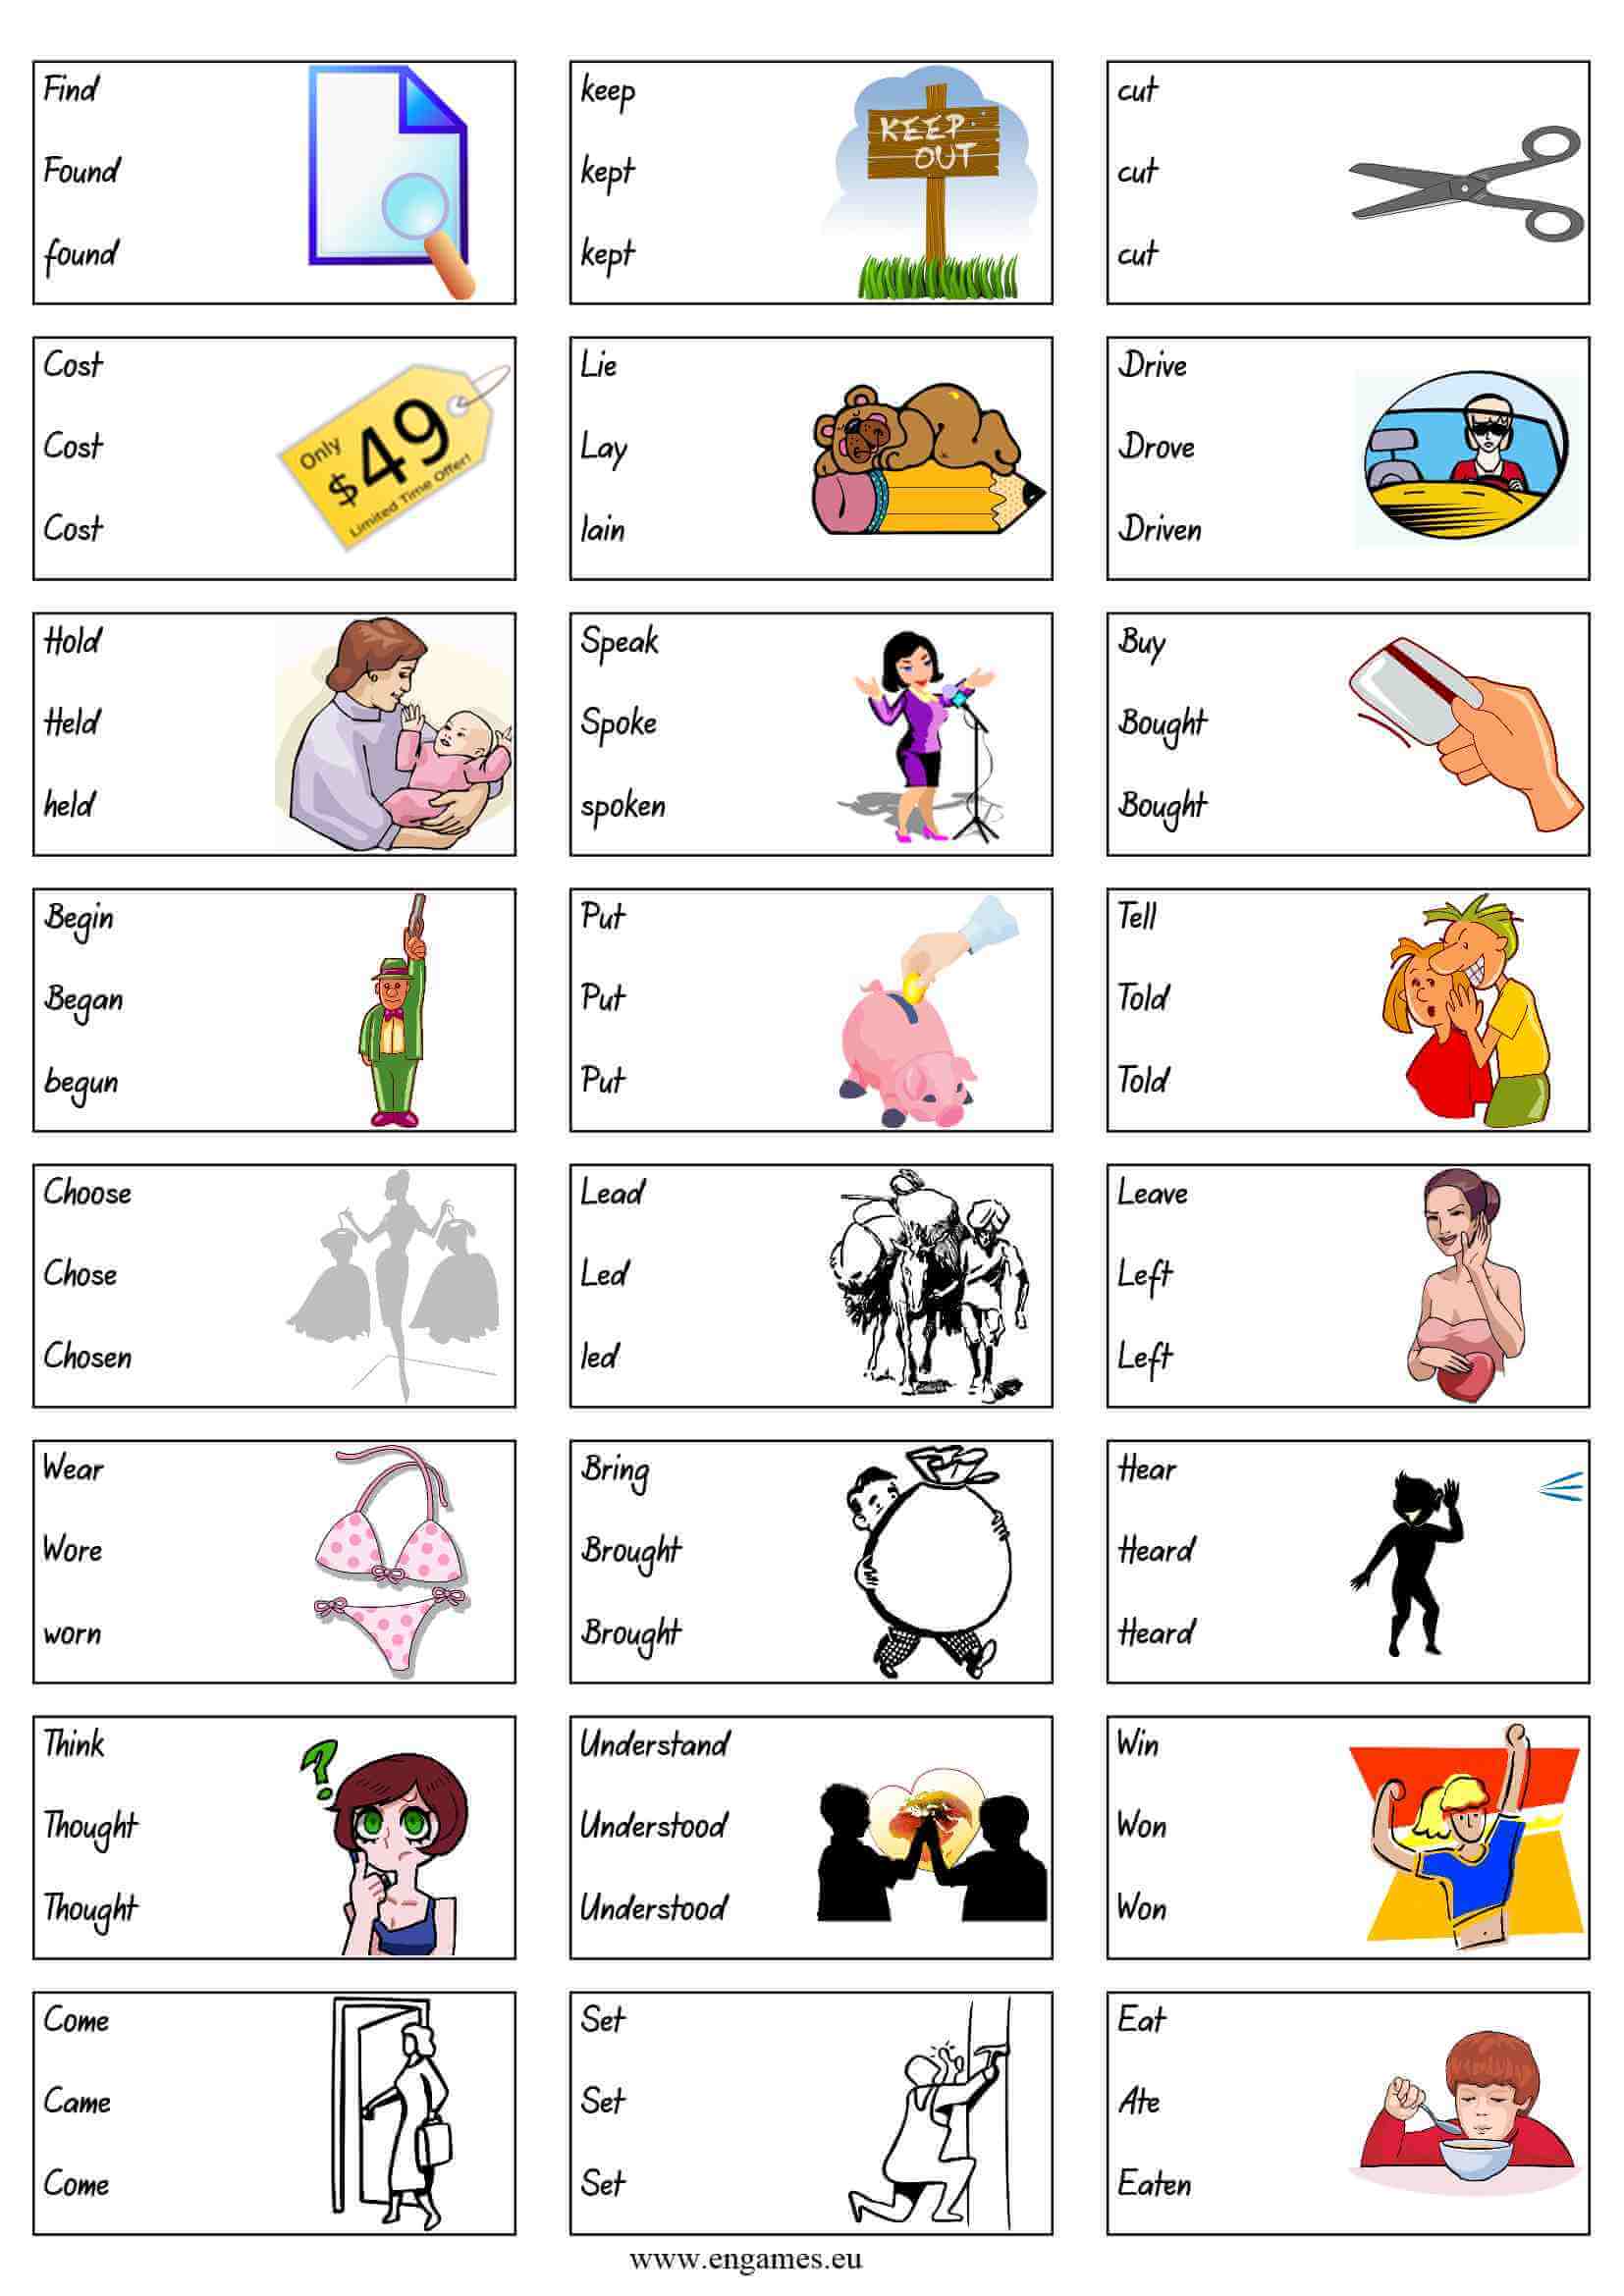 grammar-games-irregular-verbs-games-to-learn-english-games-to